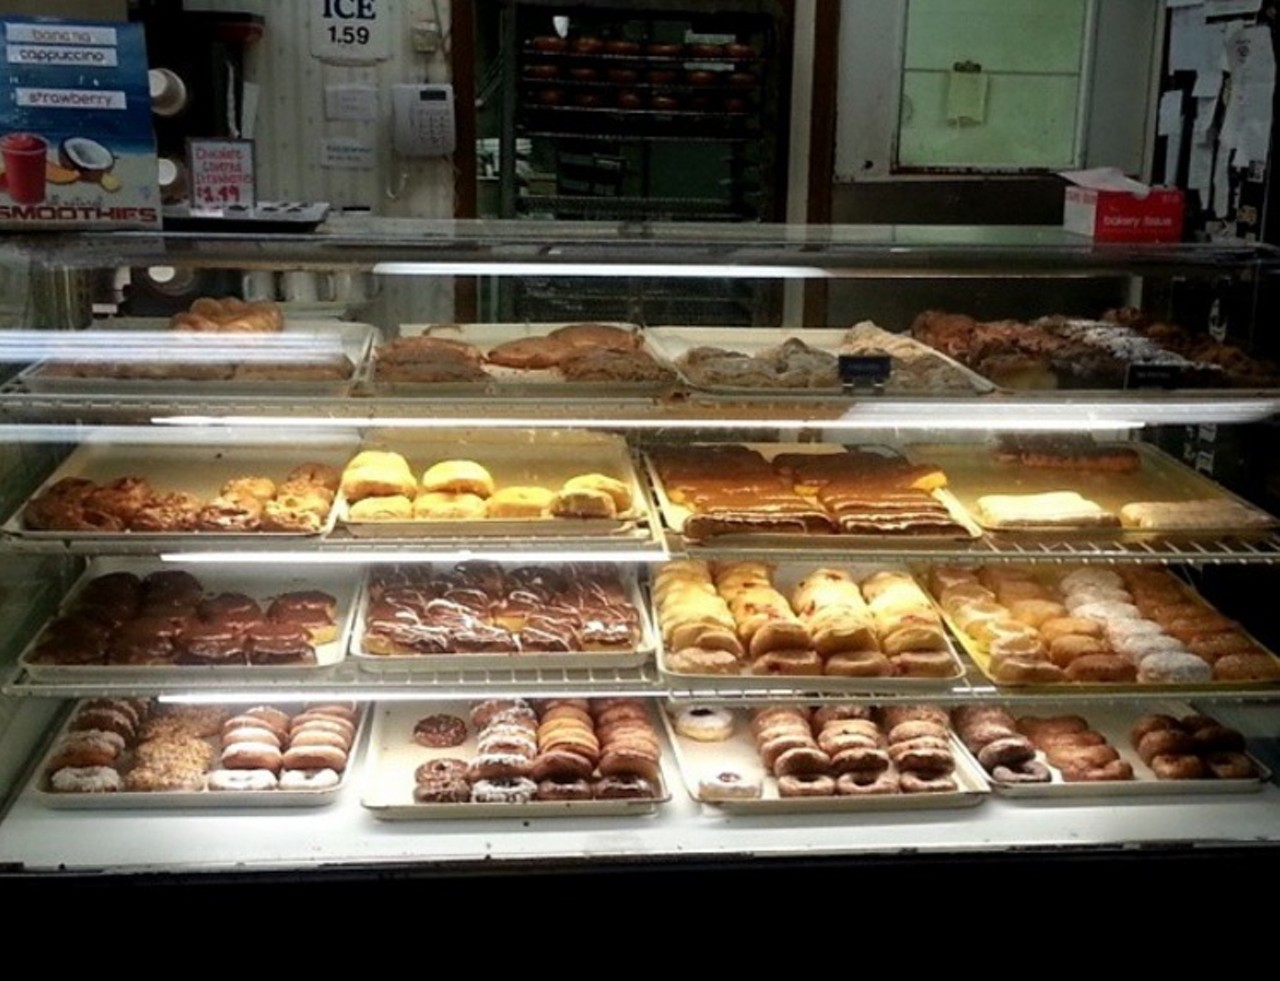 Open since 1968, Old Town Donuts runs three shifts a day to make sure the donuts are always fresh. Business must be as good as the donuts, because a second location also opened in Cottleville in 2014. Photo courtesy of Instagram / molaskaa.